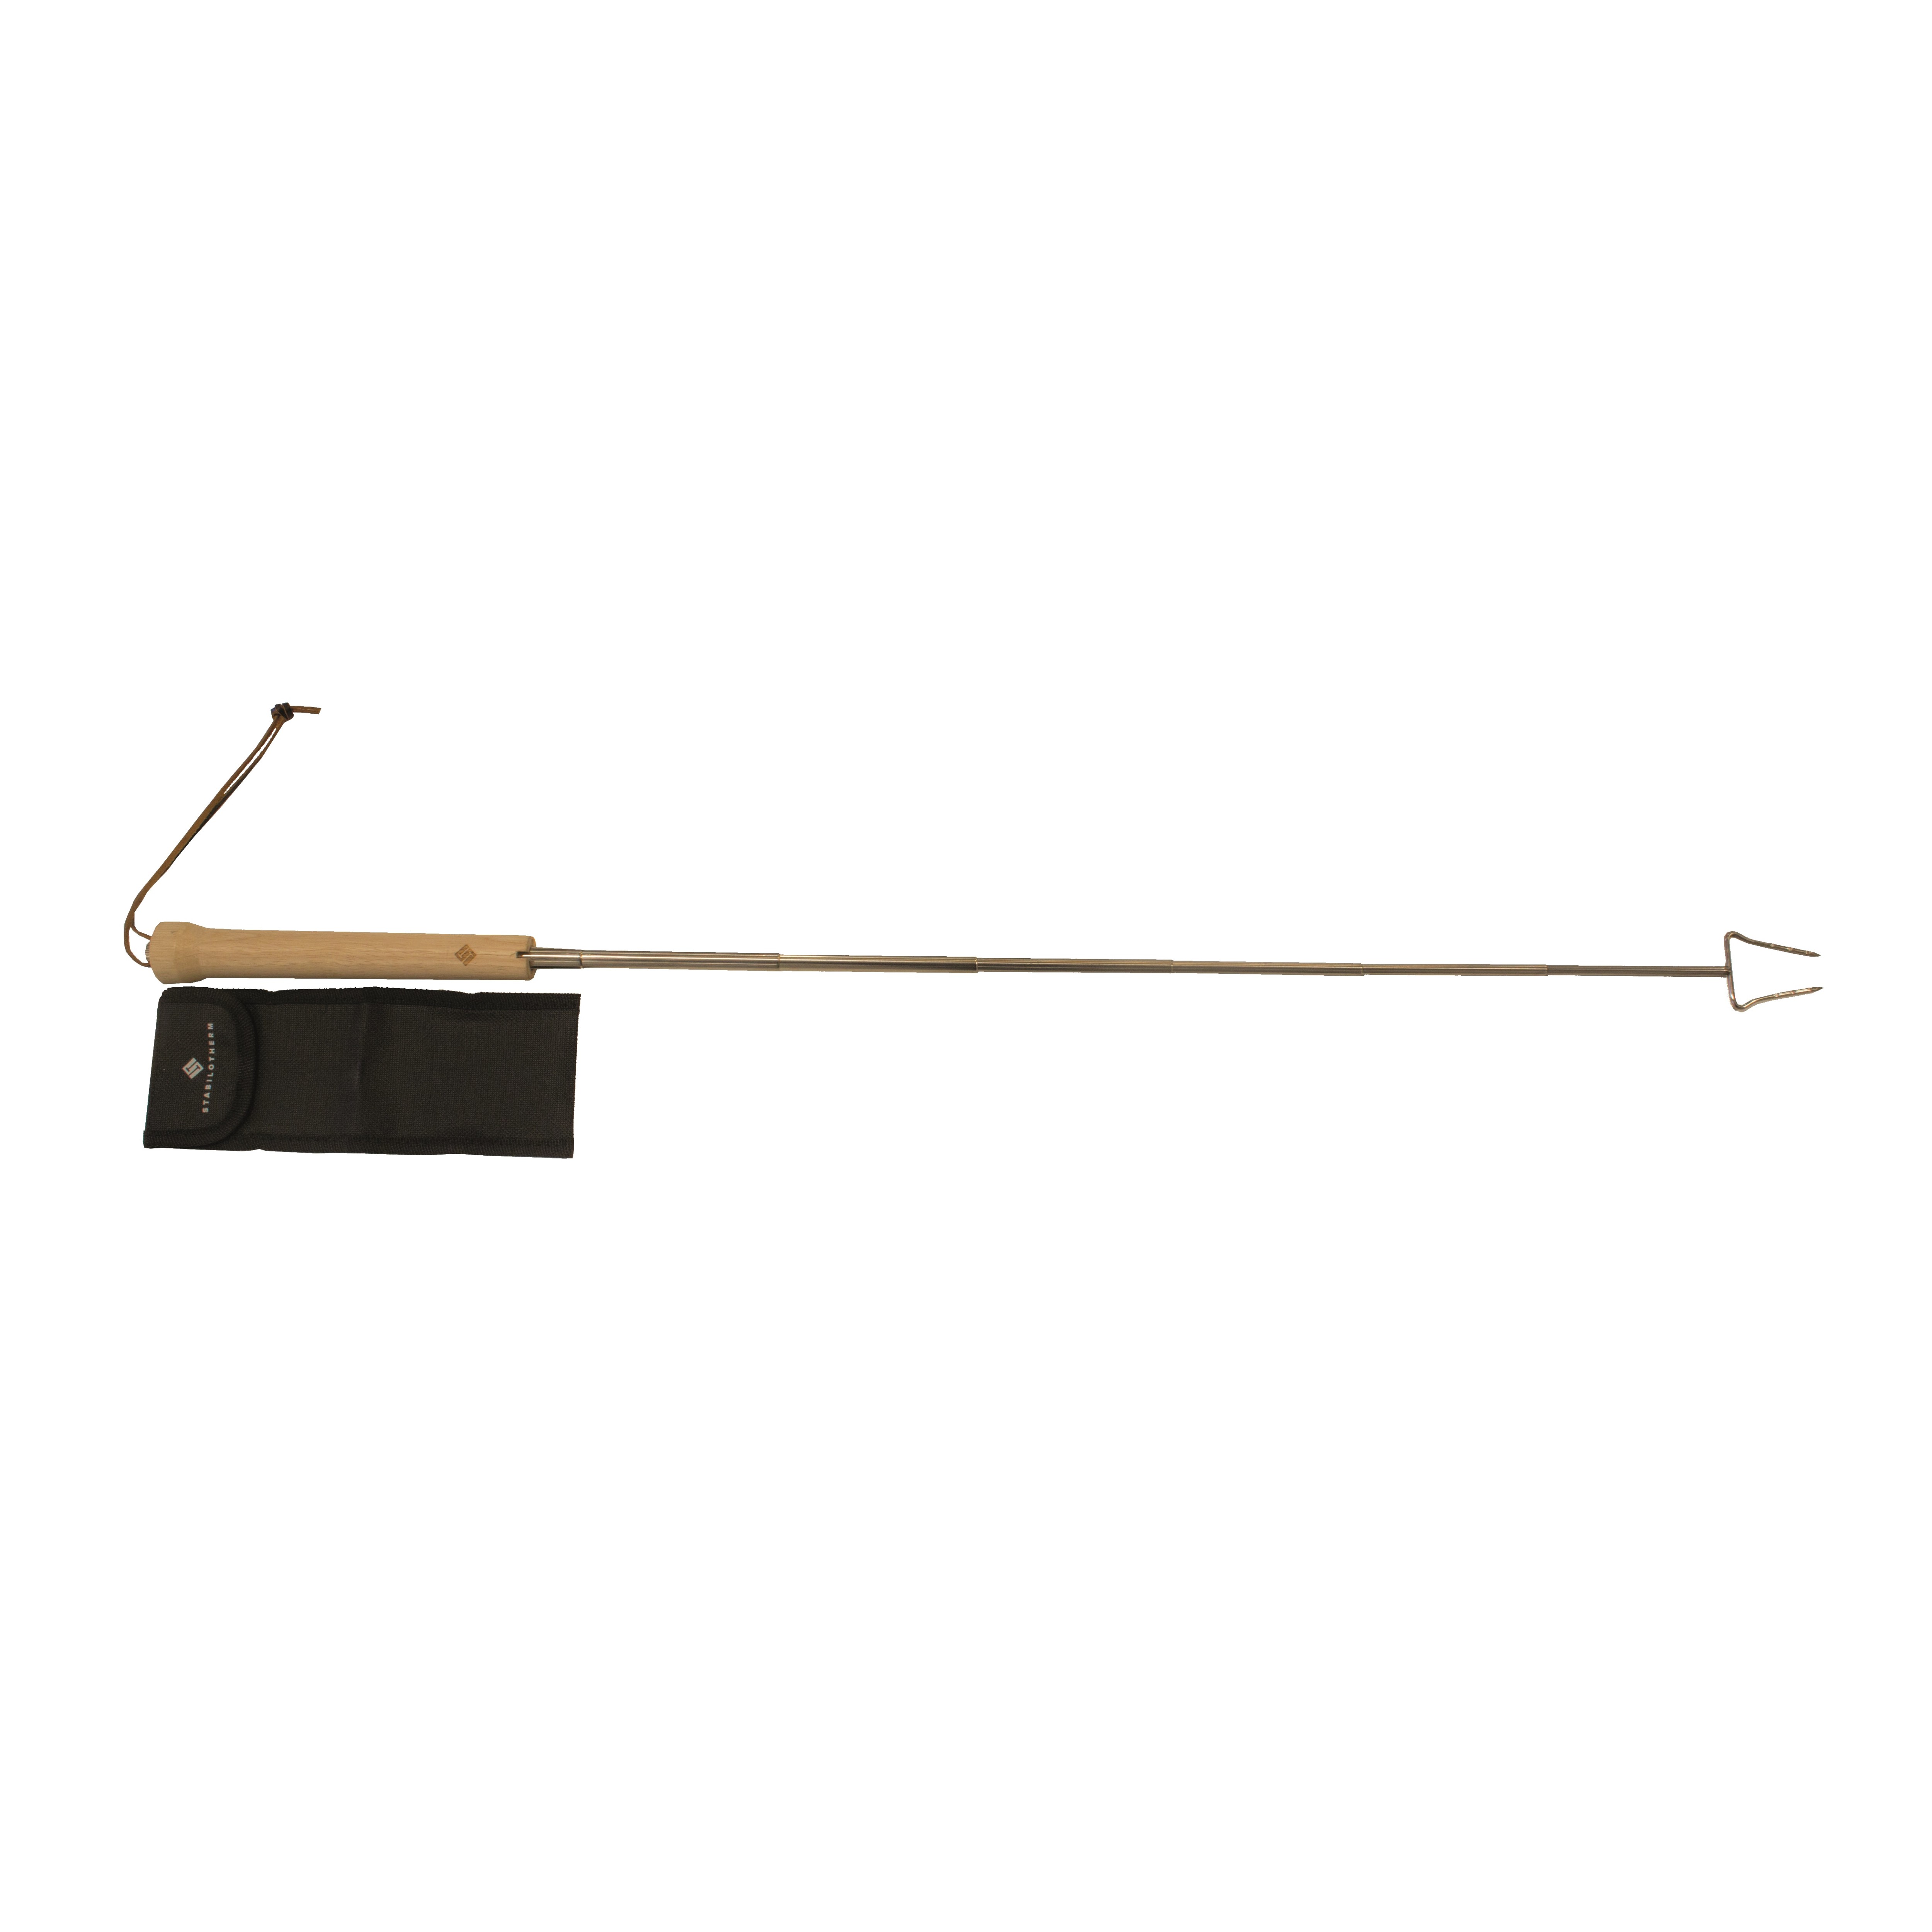 Stabilotherm BBQ Stick With Cover Wood